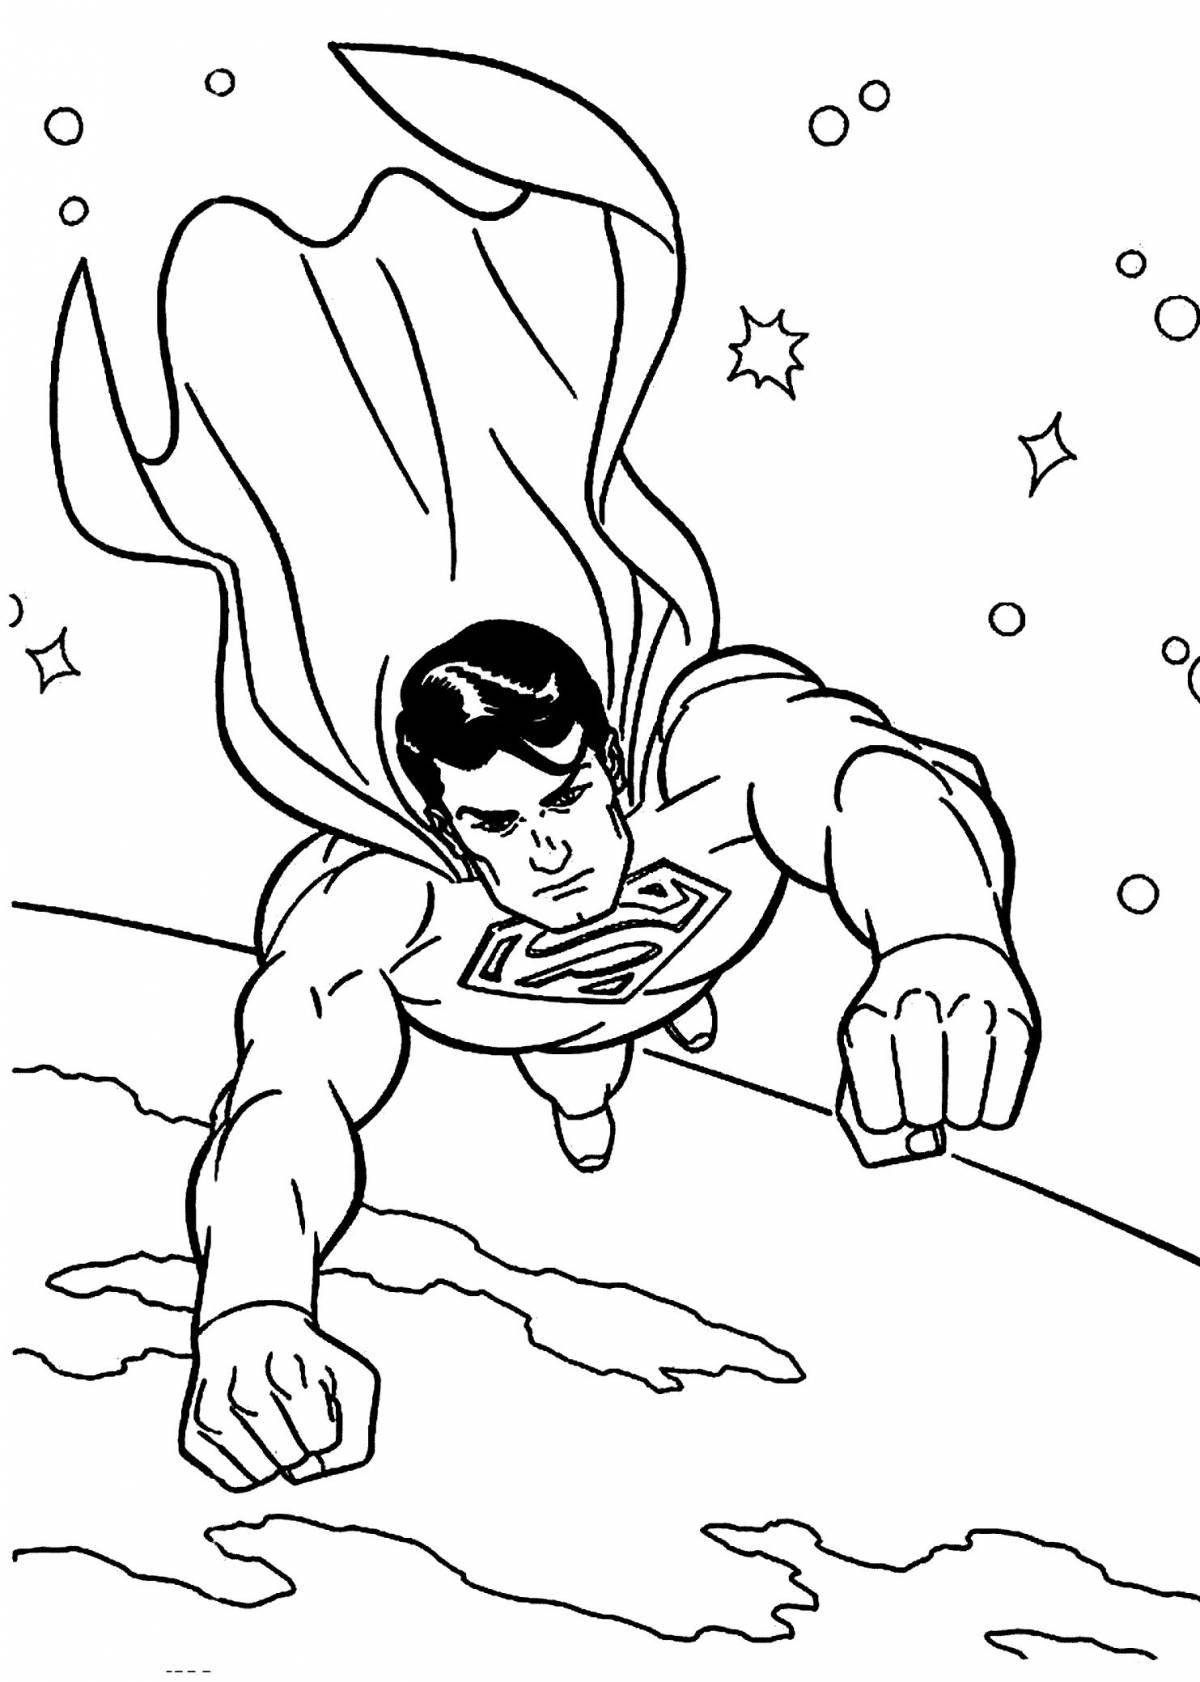 Coloring pages of superheroes for children 5-6 years old